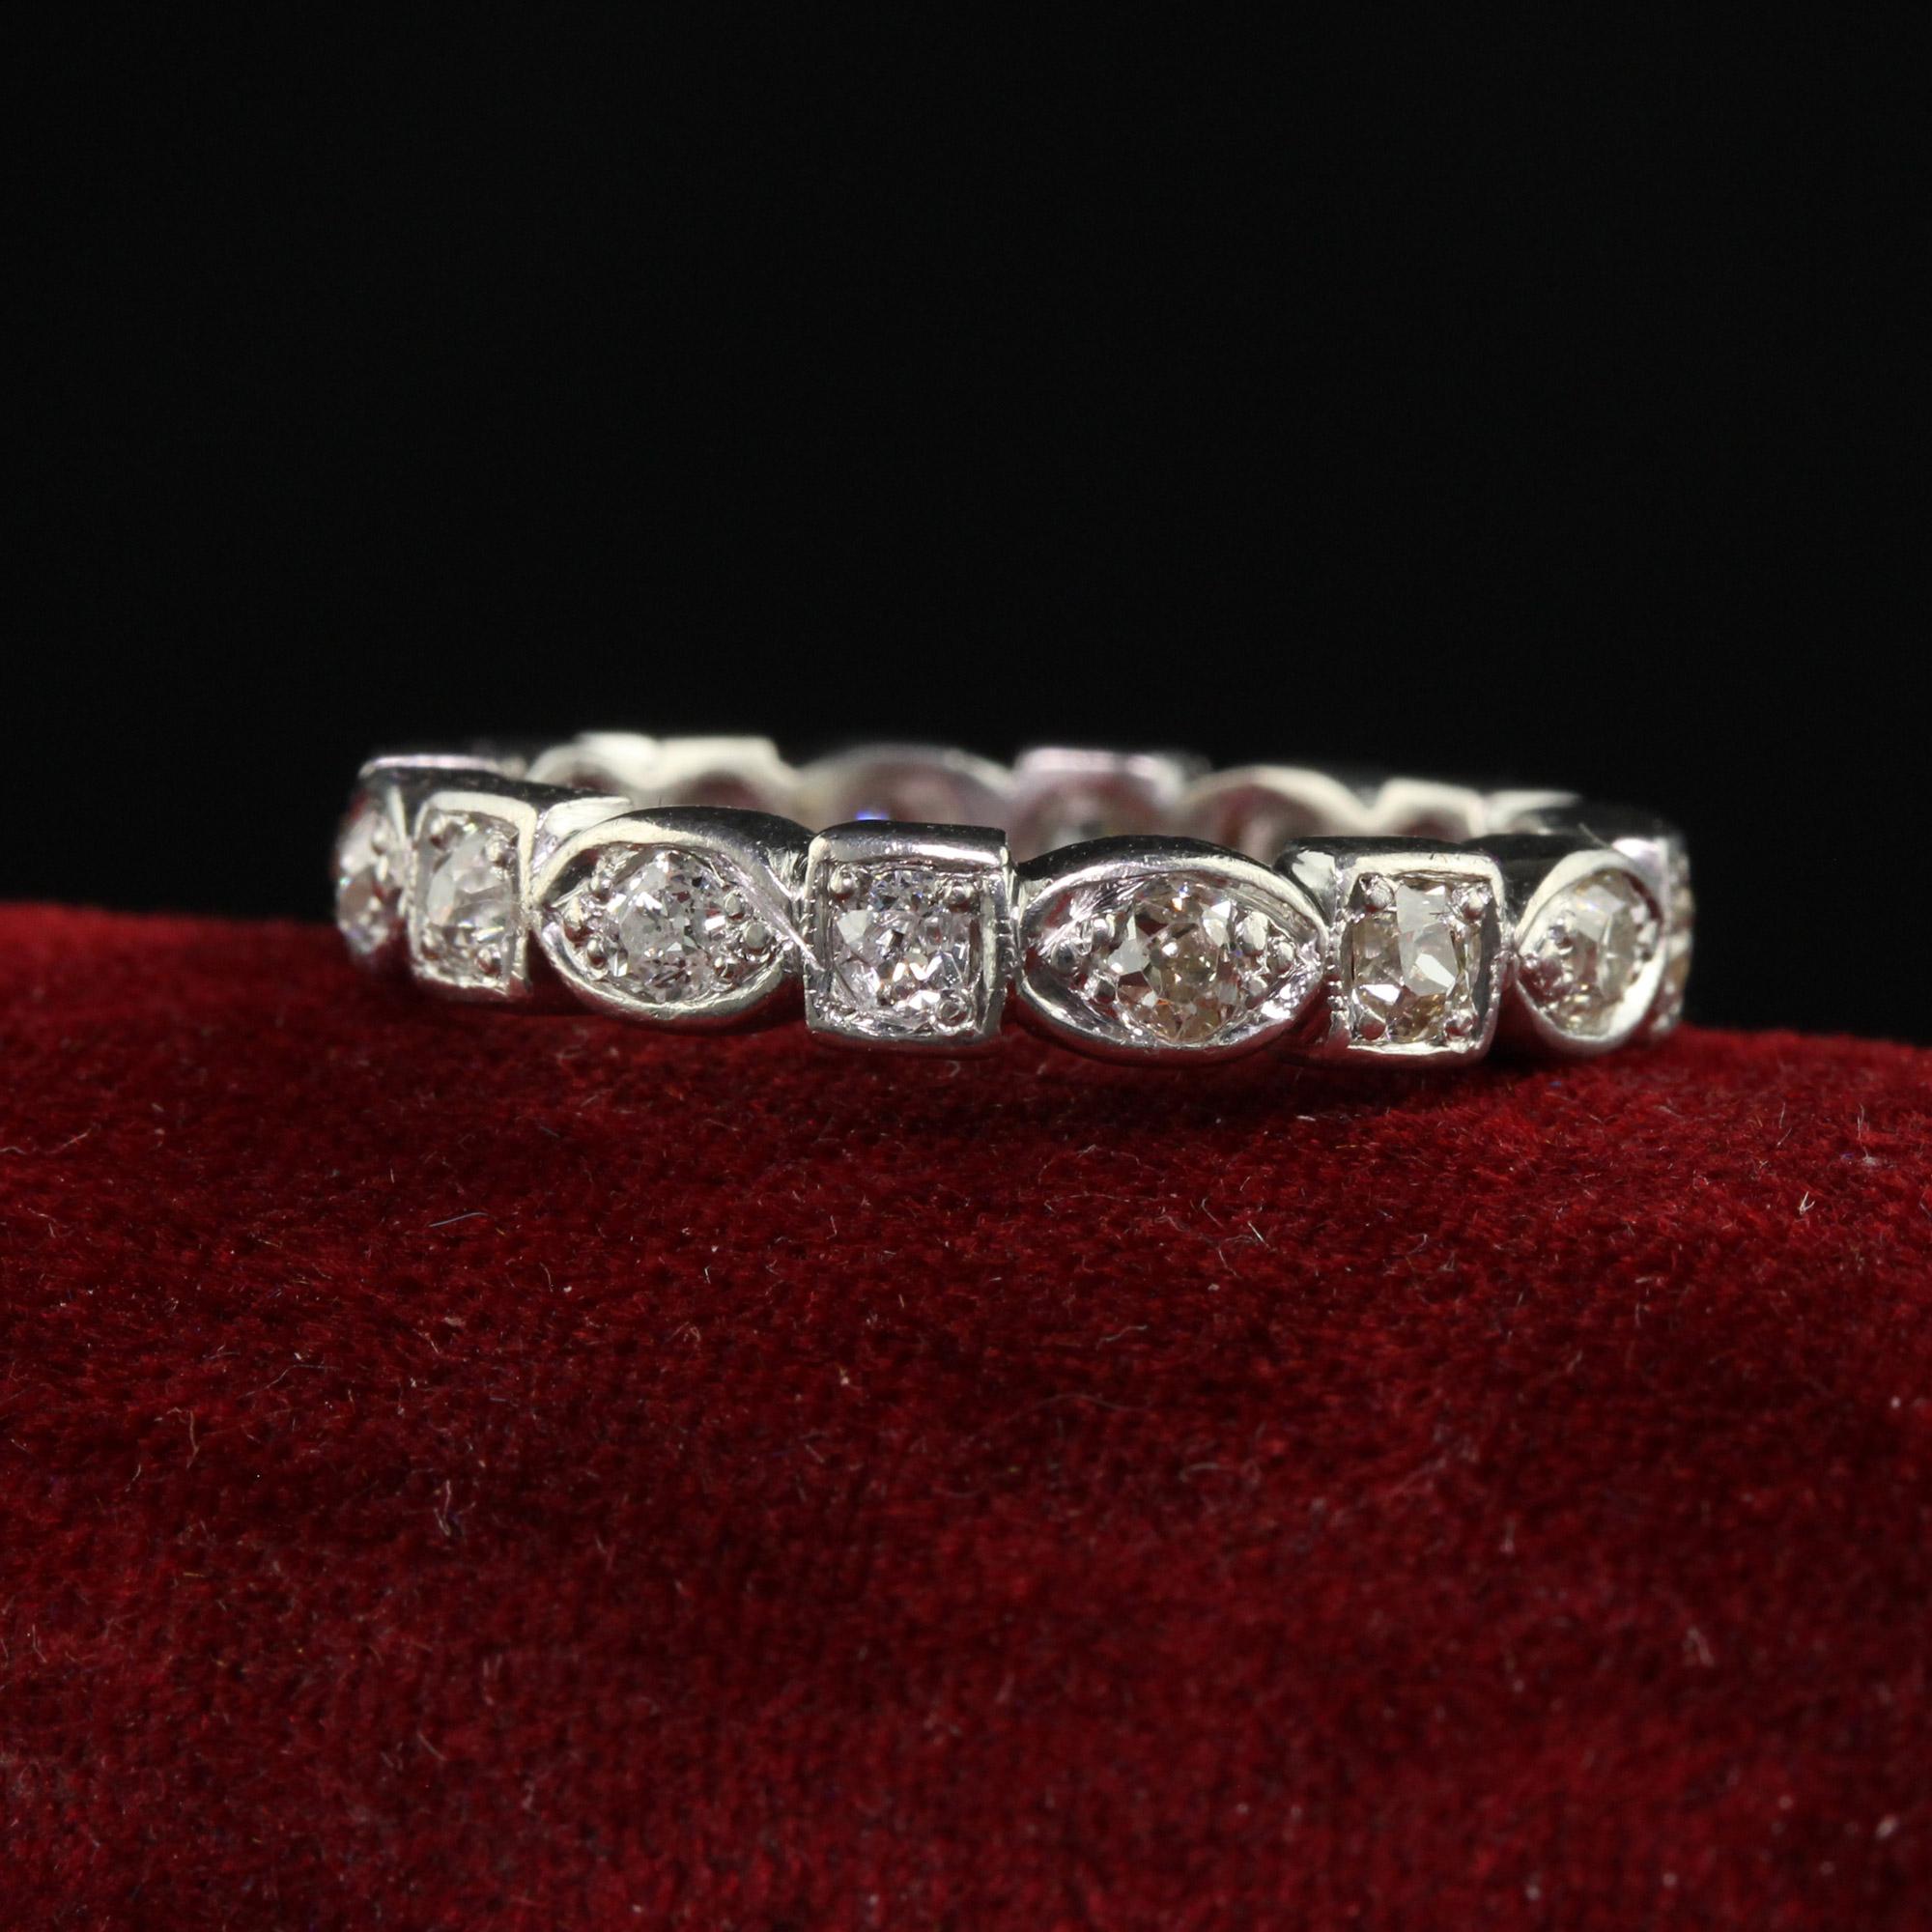 Beautiful Antique Art Deco Platinum Old Mine Diamond Geometric Eternity Band - Size 6 1/2 . This beautiful old mine diamond eternity band is crafted in platinum. There are old mine cut diamonds going around the entire band and are set in geometric